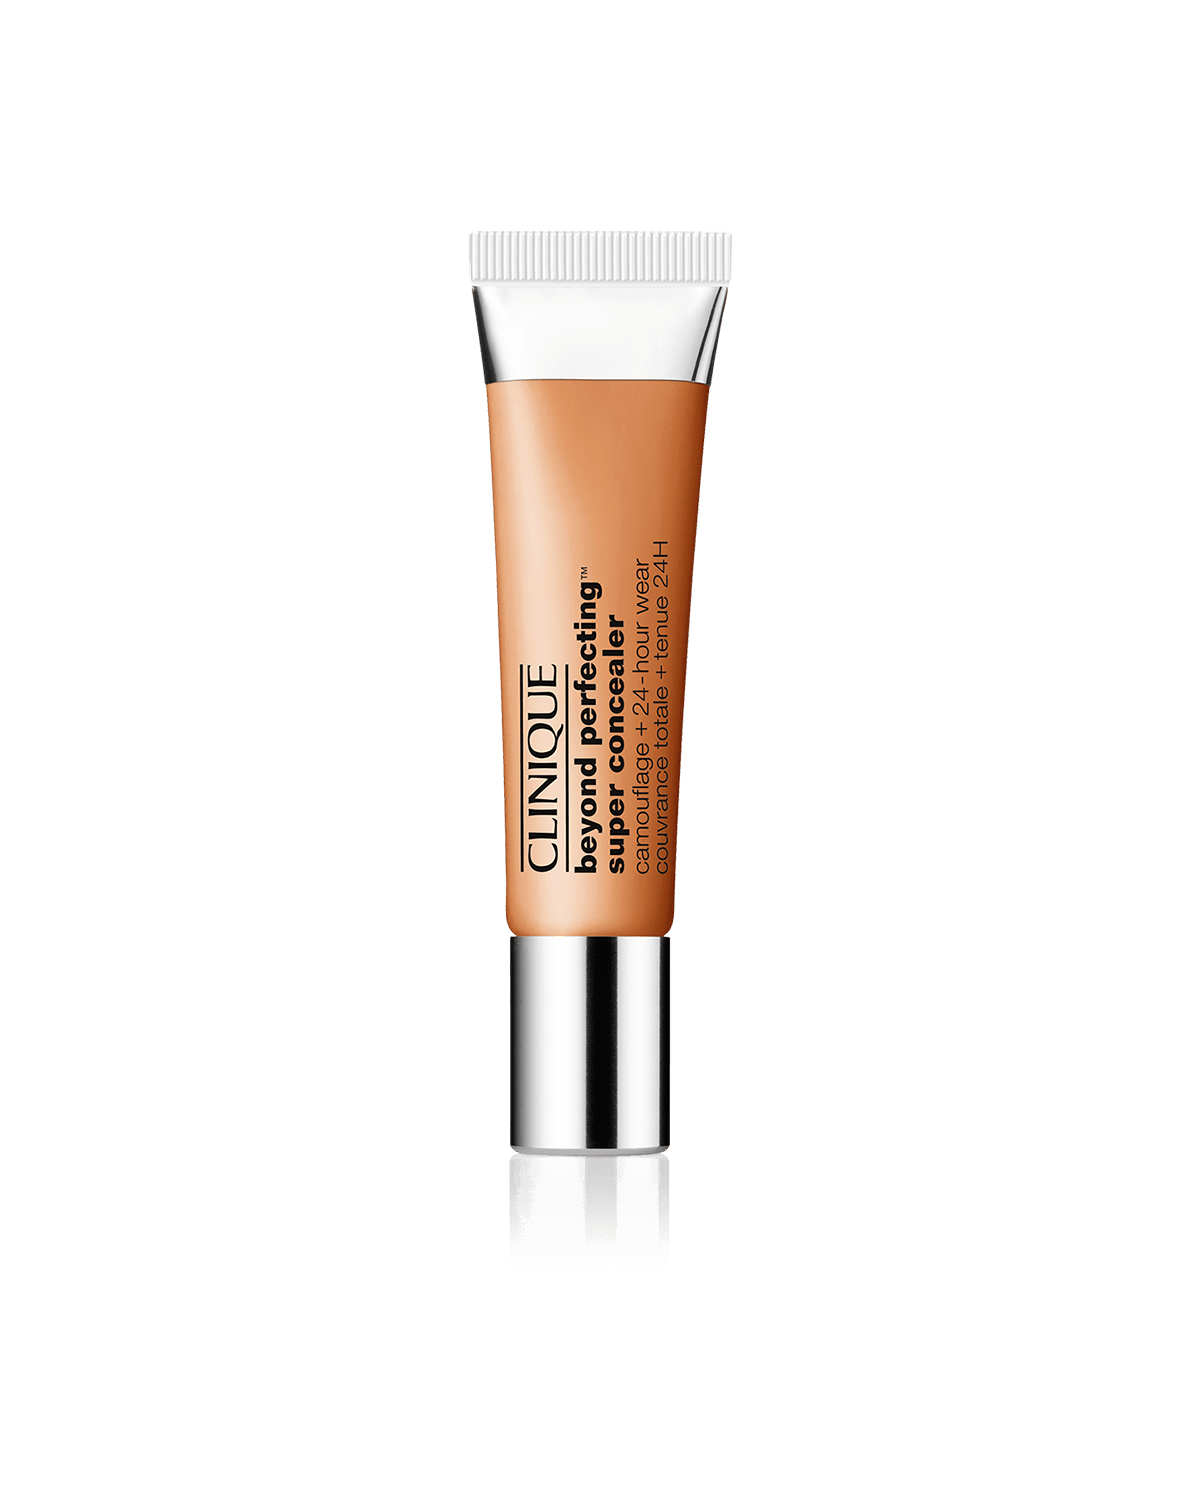 Beyond Perfecting™ Super Concealer Camouflage +24h Wear